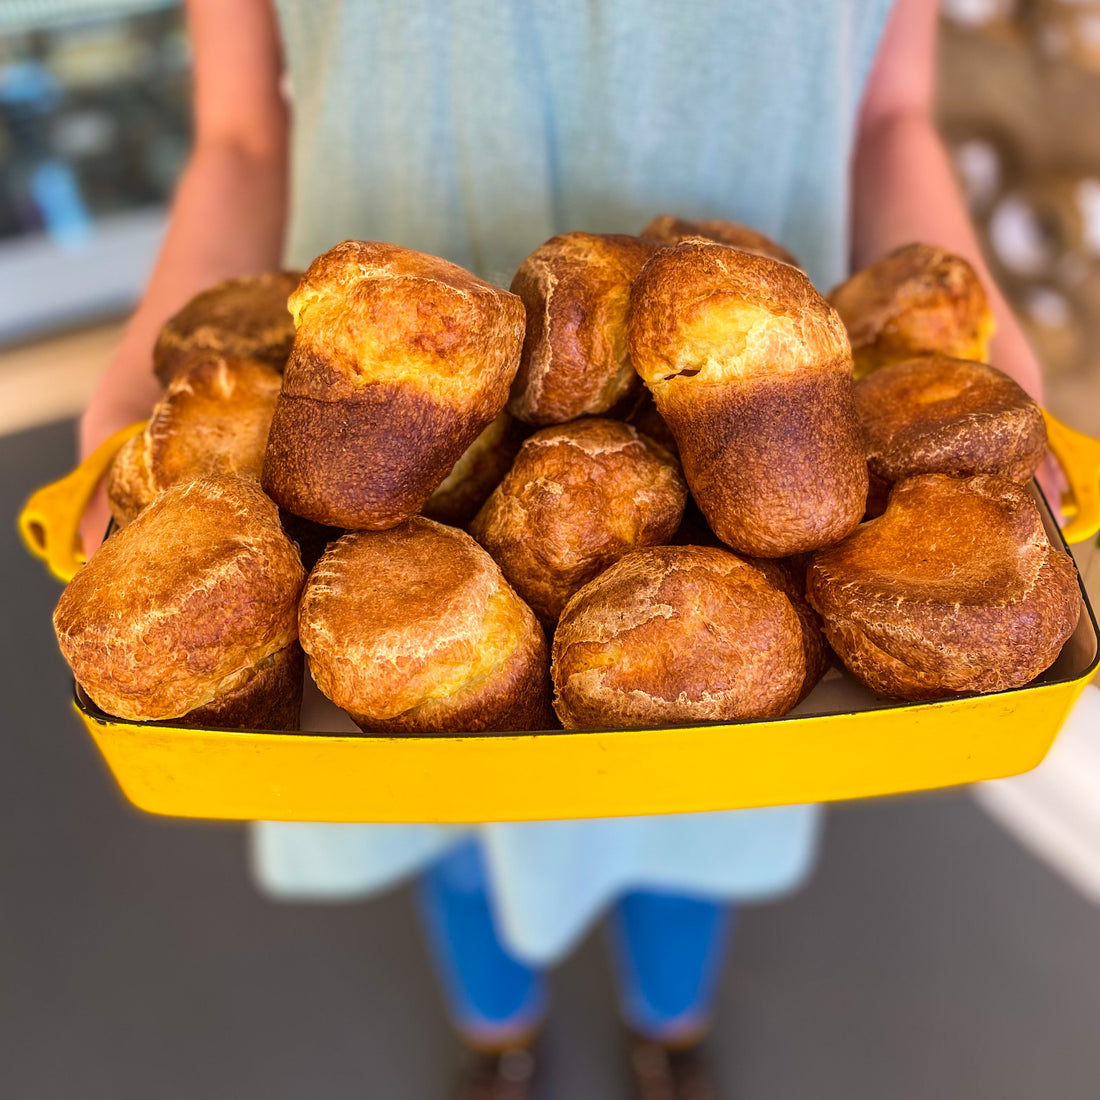 A person holding a dish containing dozens of fresh popovers.